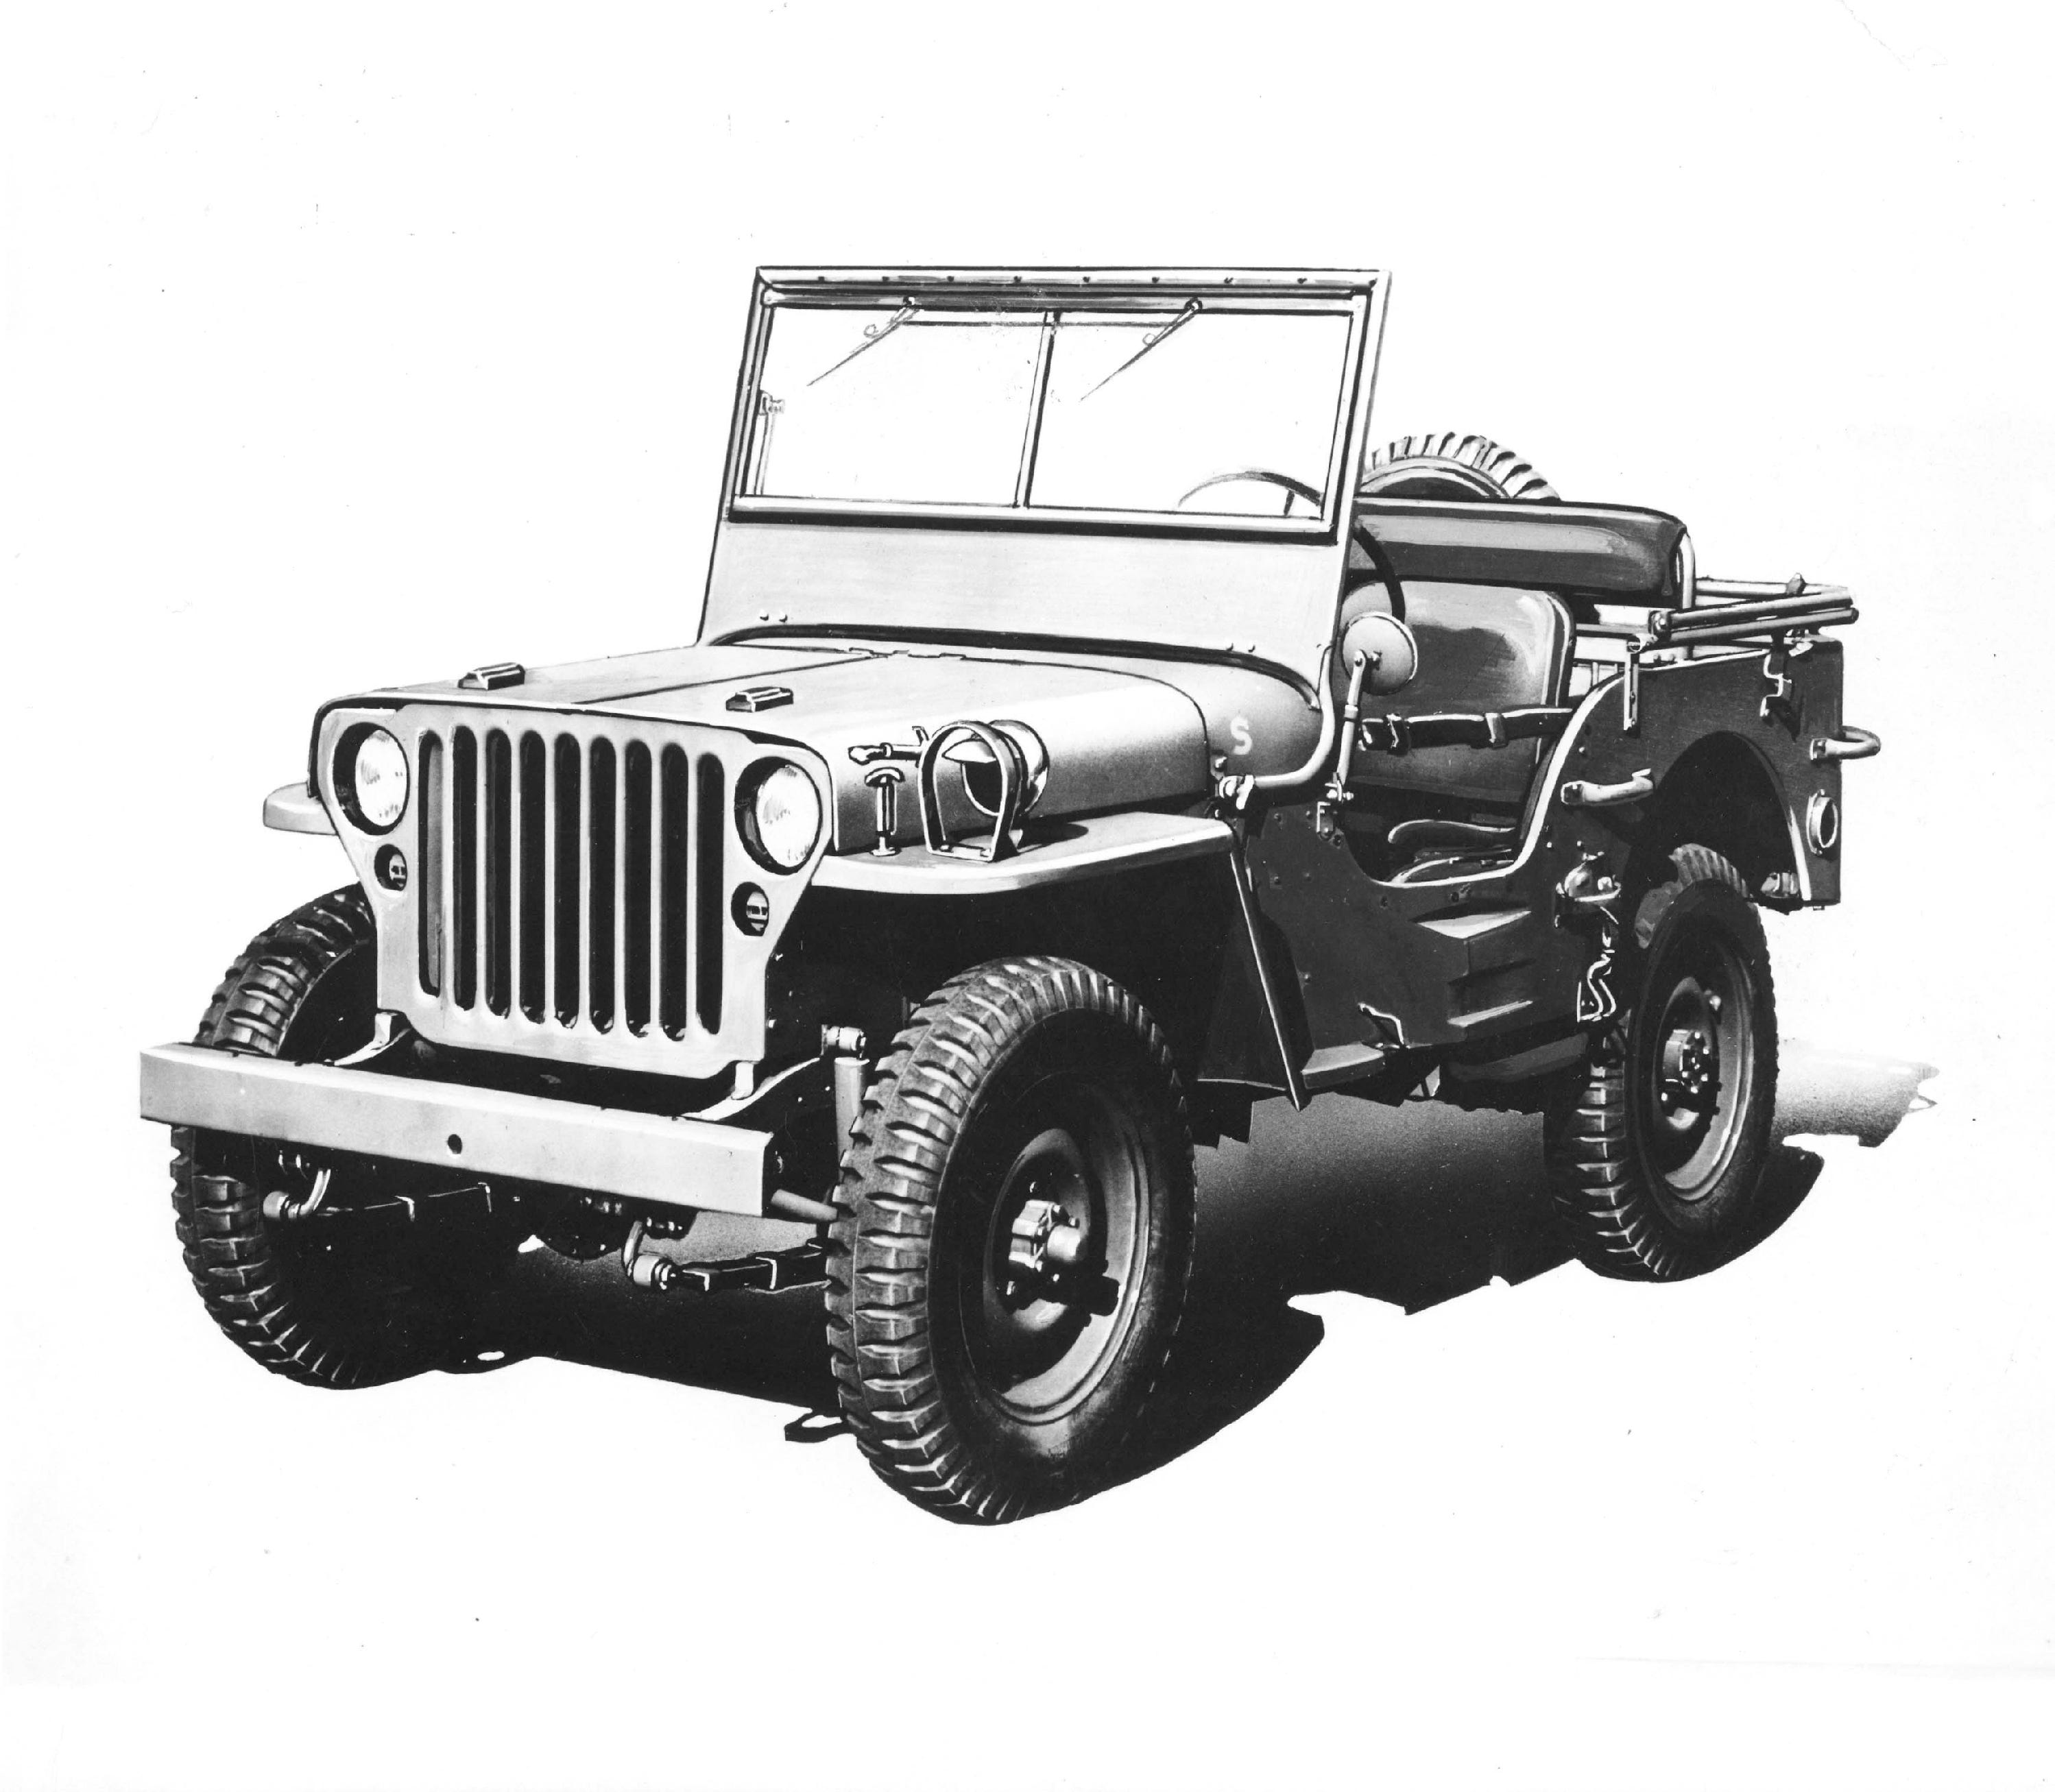 1941-1945 Willys-Overland MB: The Willys Quad and the MA were early prototypes that led to the production of the Overland MB. However, the Army, and the world, came to know it as the Jeep¨. Willys-Overland would build more than 368,000 vehicles, and under license, Ford Motor Company built some 277,000, for the U.S. Army. The rugged, reliable olive-drab vehicle would forever be known for helping win a world war. Willys trademarked the ÒJeepÓ name after the war and planned to turn the vehicle into an off-road utility vehicle for the farm Ð the civilian Universal Jeep. One of Willys' slogans at the time was, ÒThe Sun Never Sets on the Mighty Jeep,Ó and the company set about making sure the world recognized Willys as the creator of the vehicle.